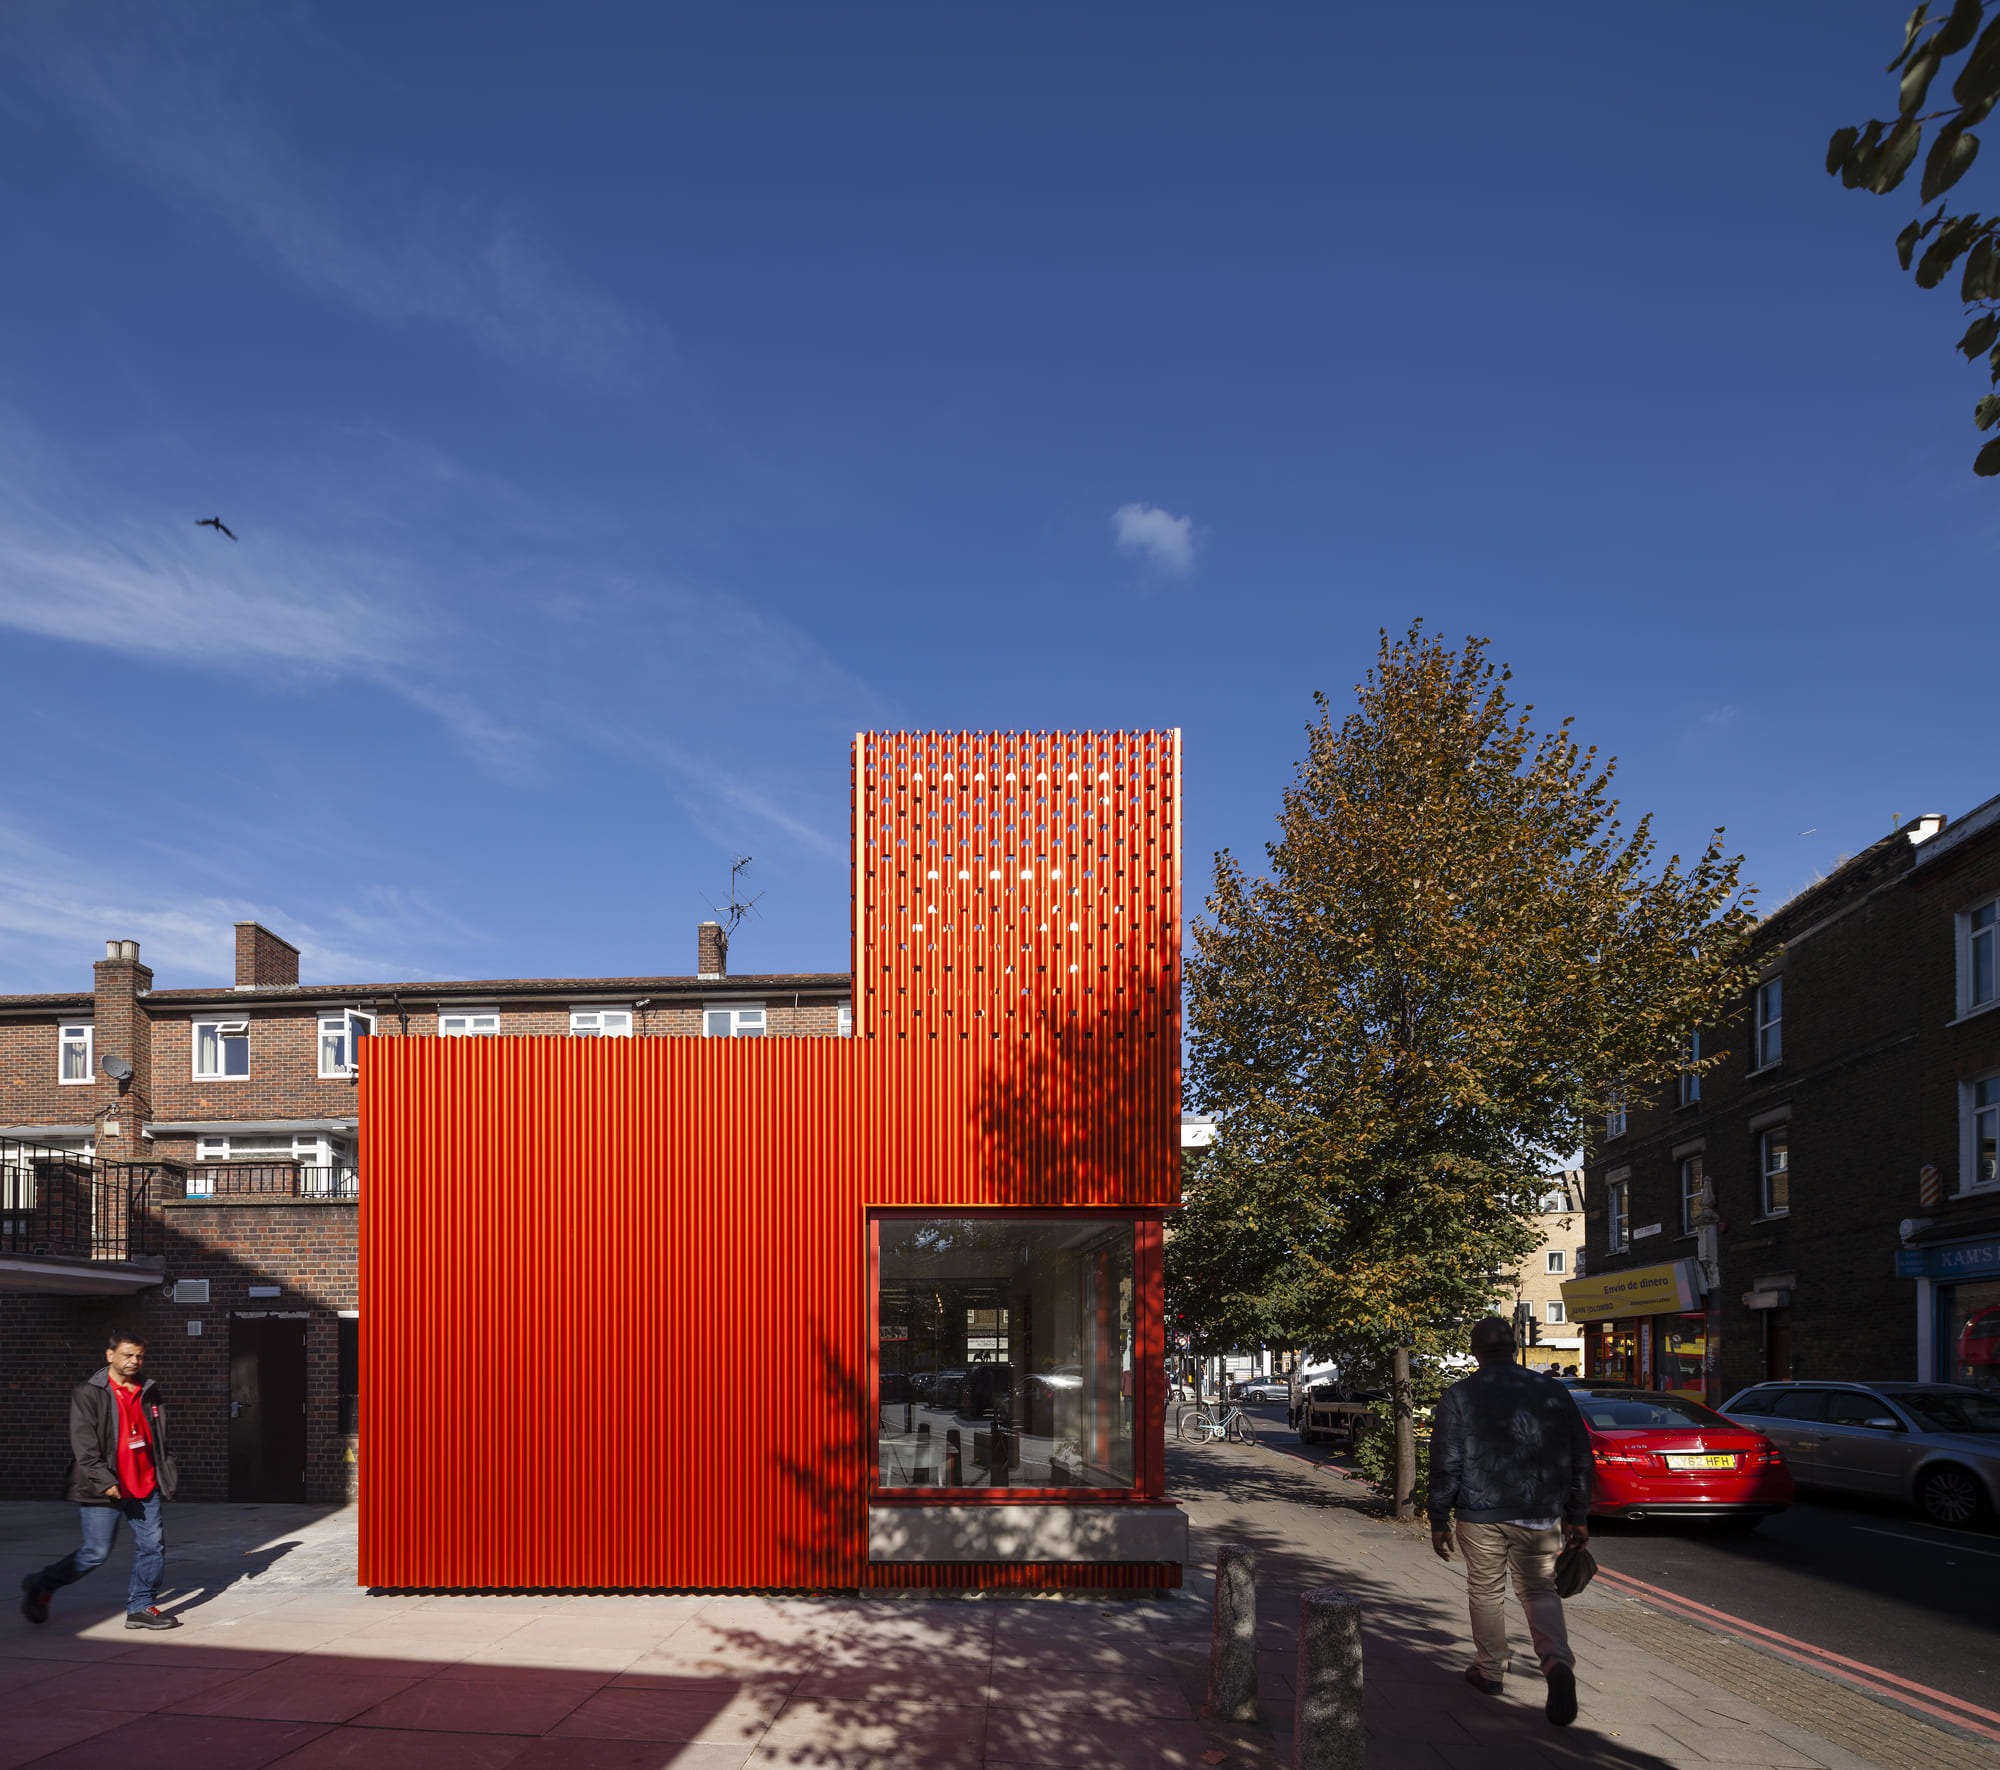 East Street Library in Walworth, London